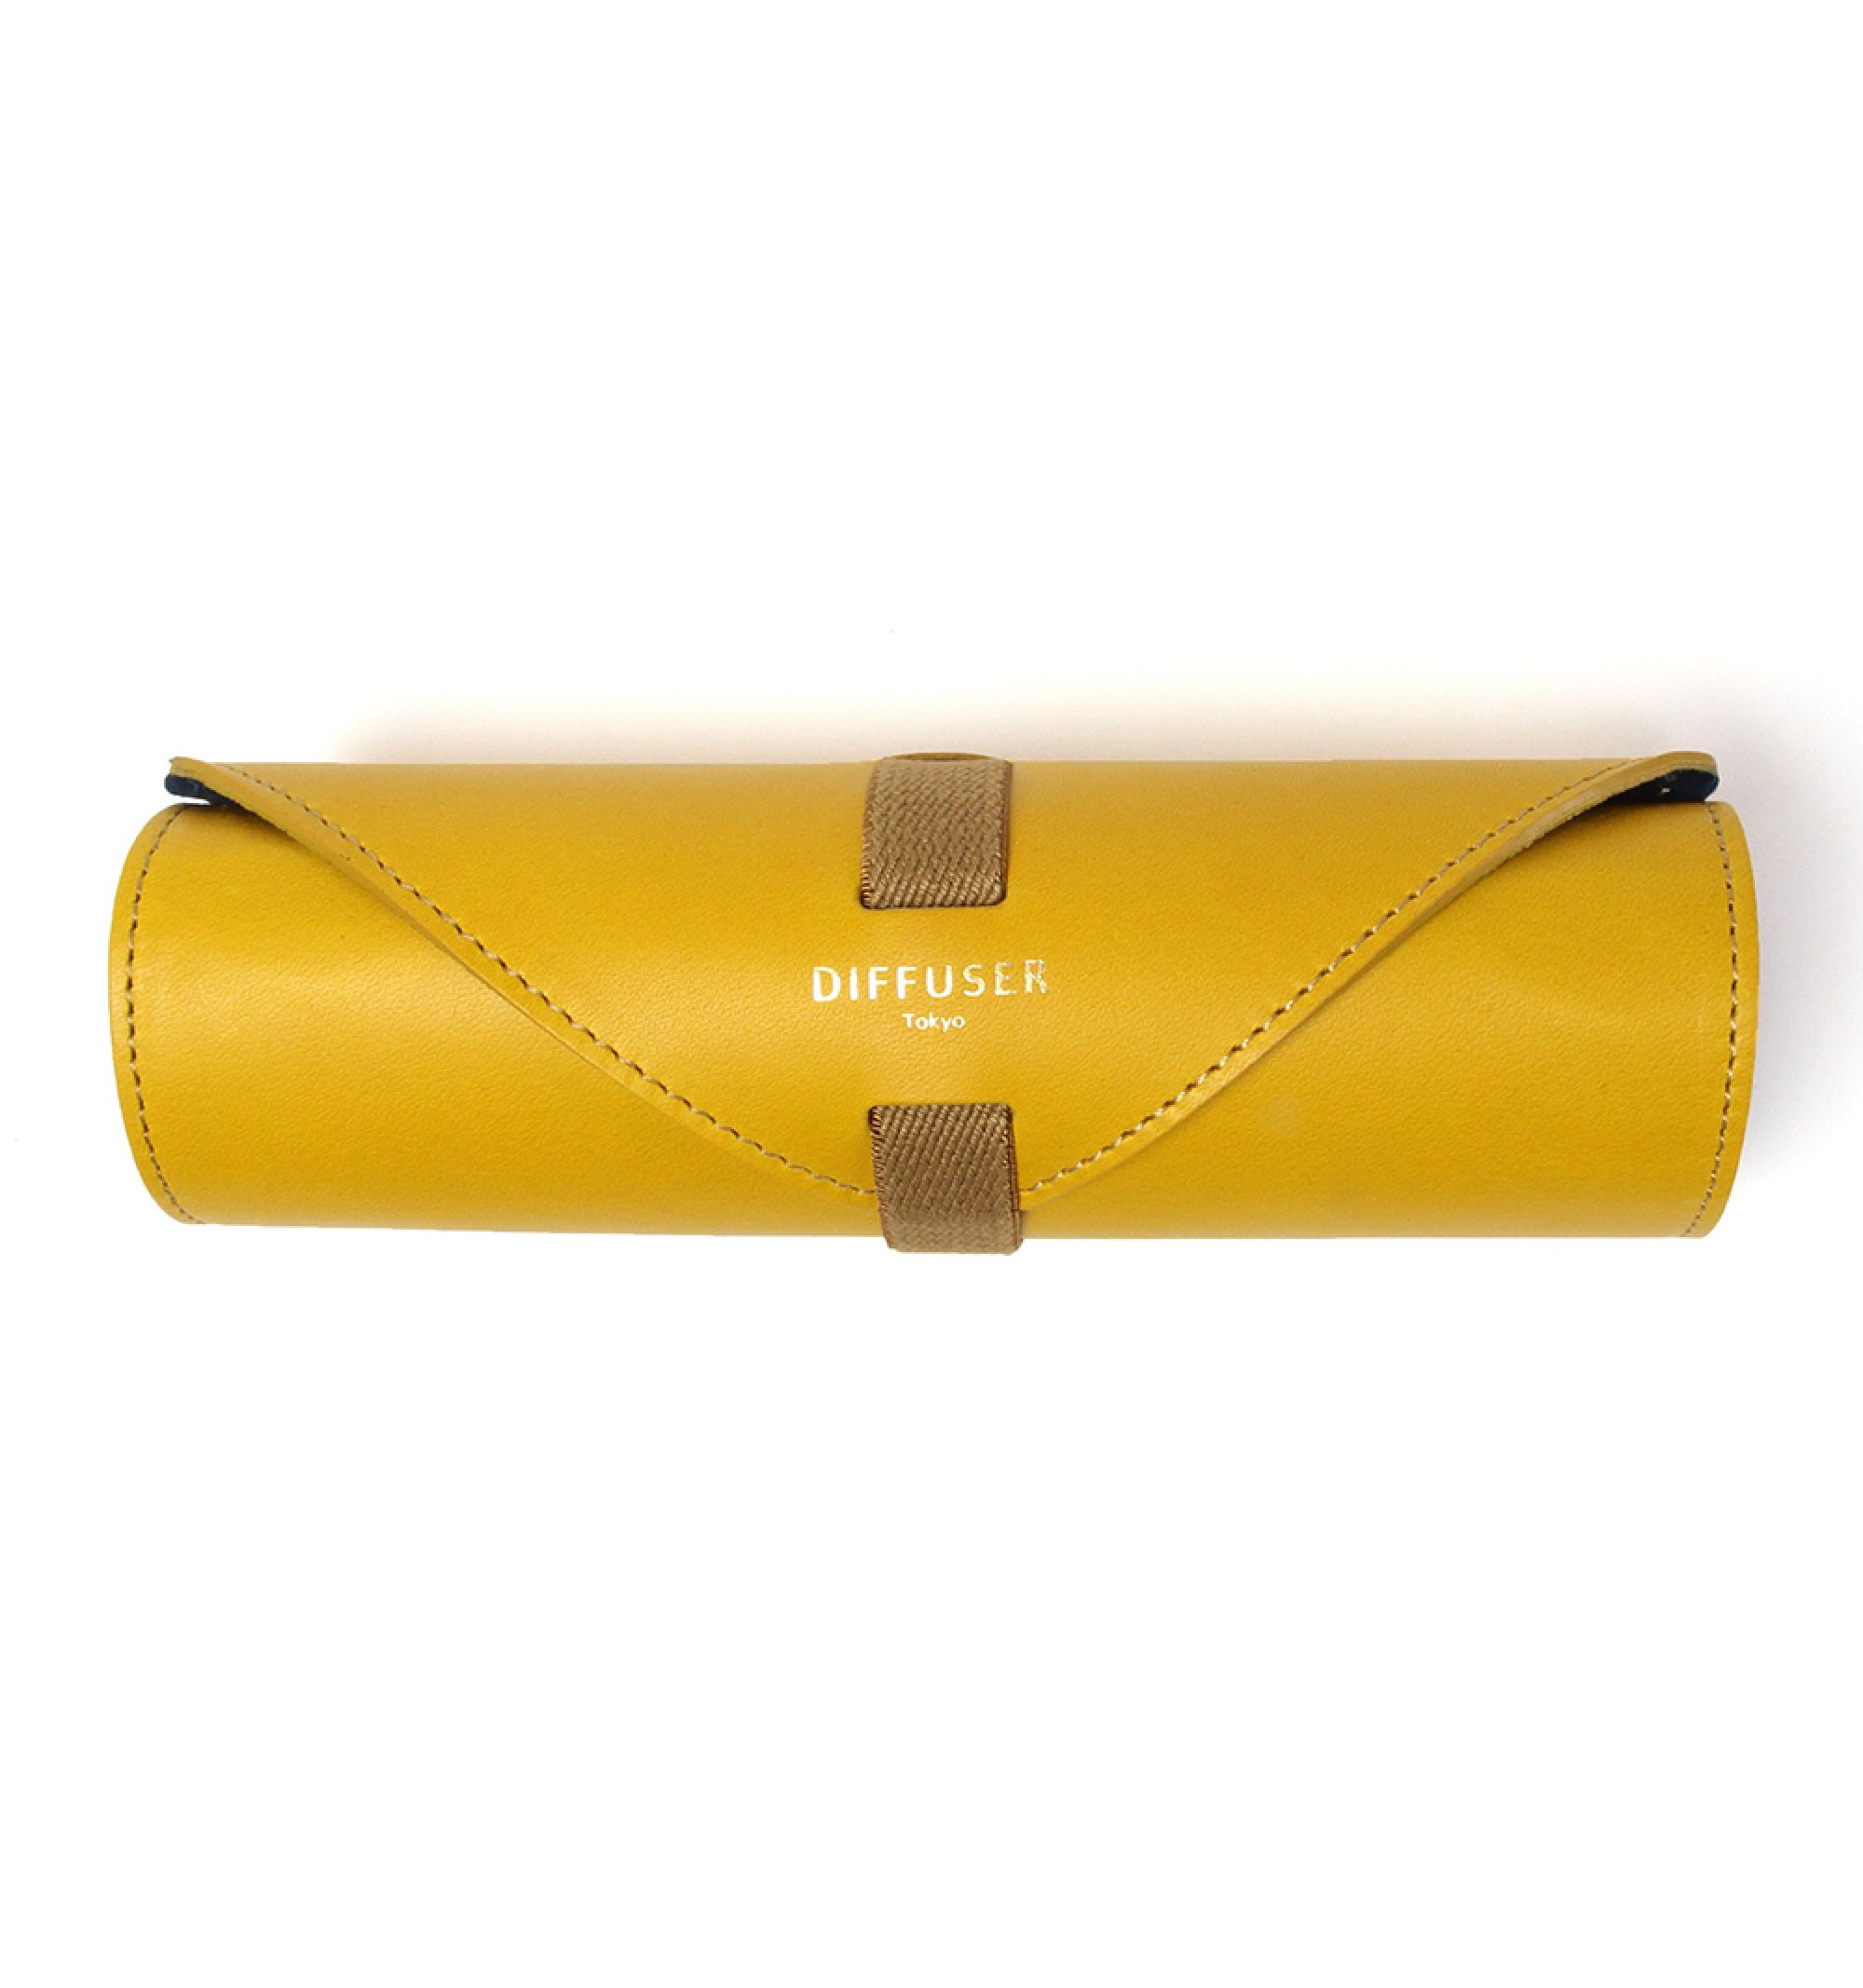 DIFFUSER TOKYO / OIL LEATHER ROLL EYEWEAR CASE / YELLOW & NAVY